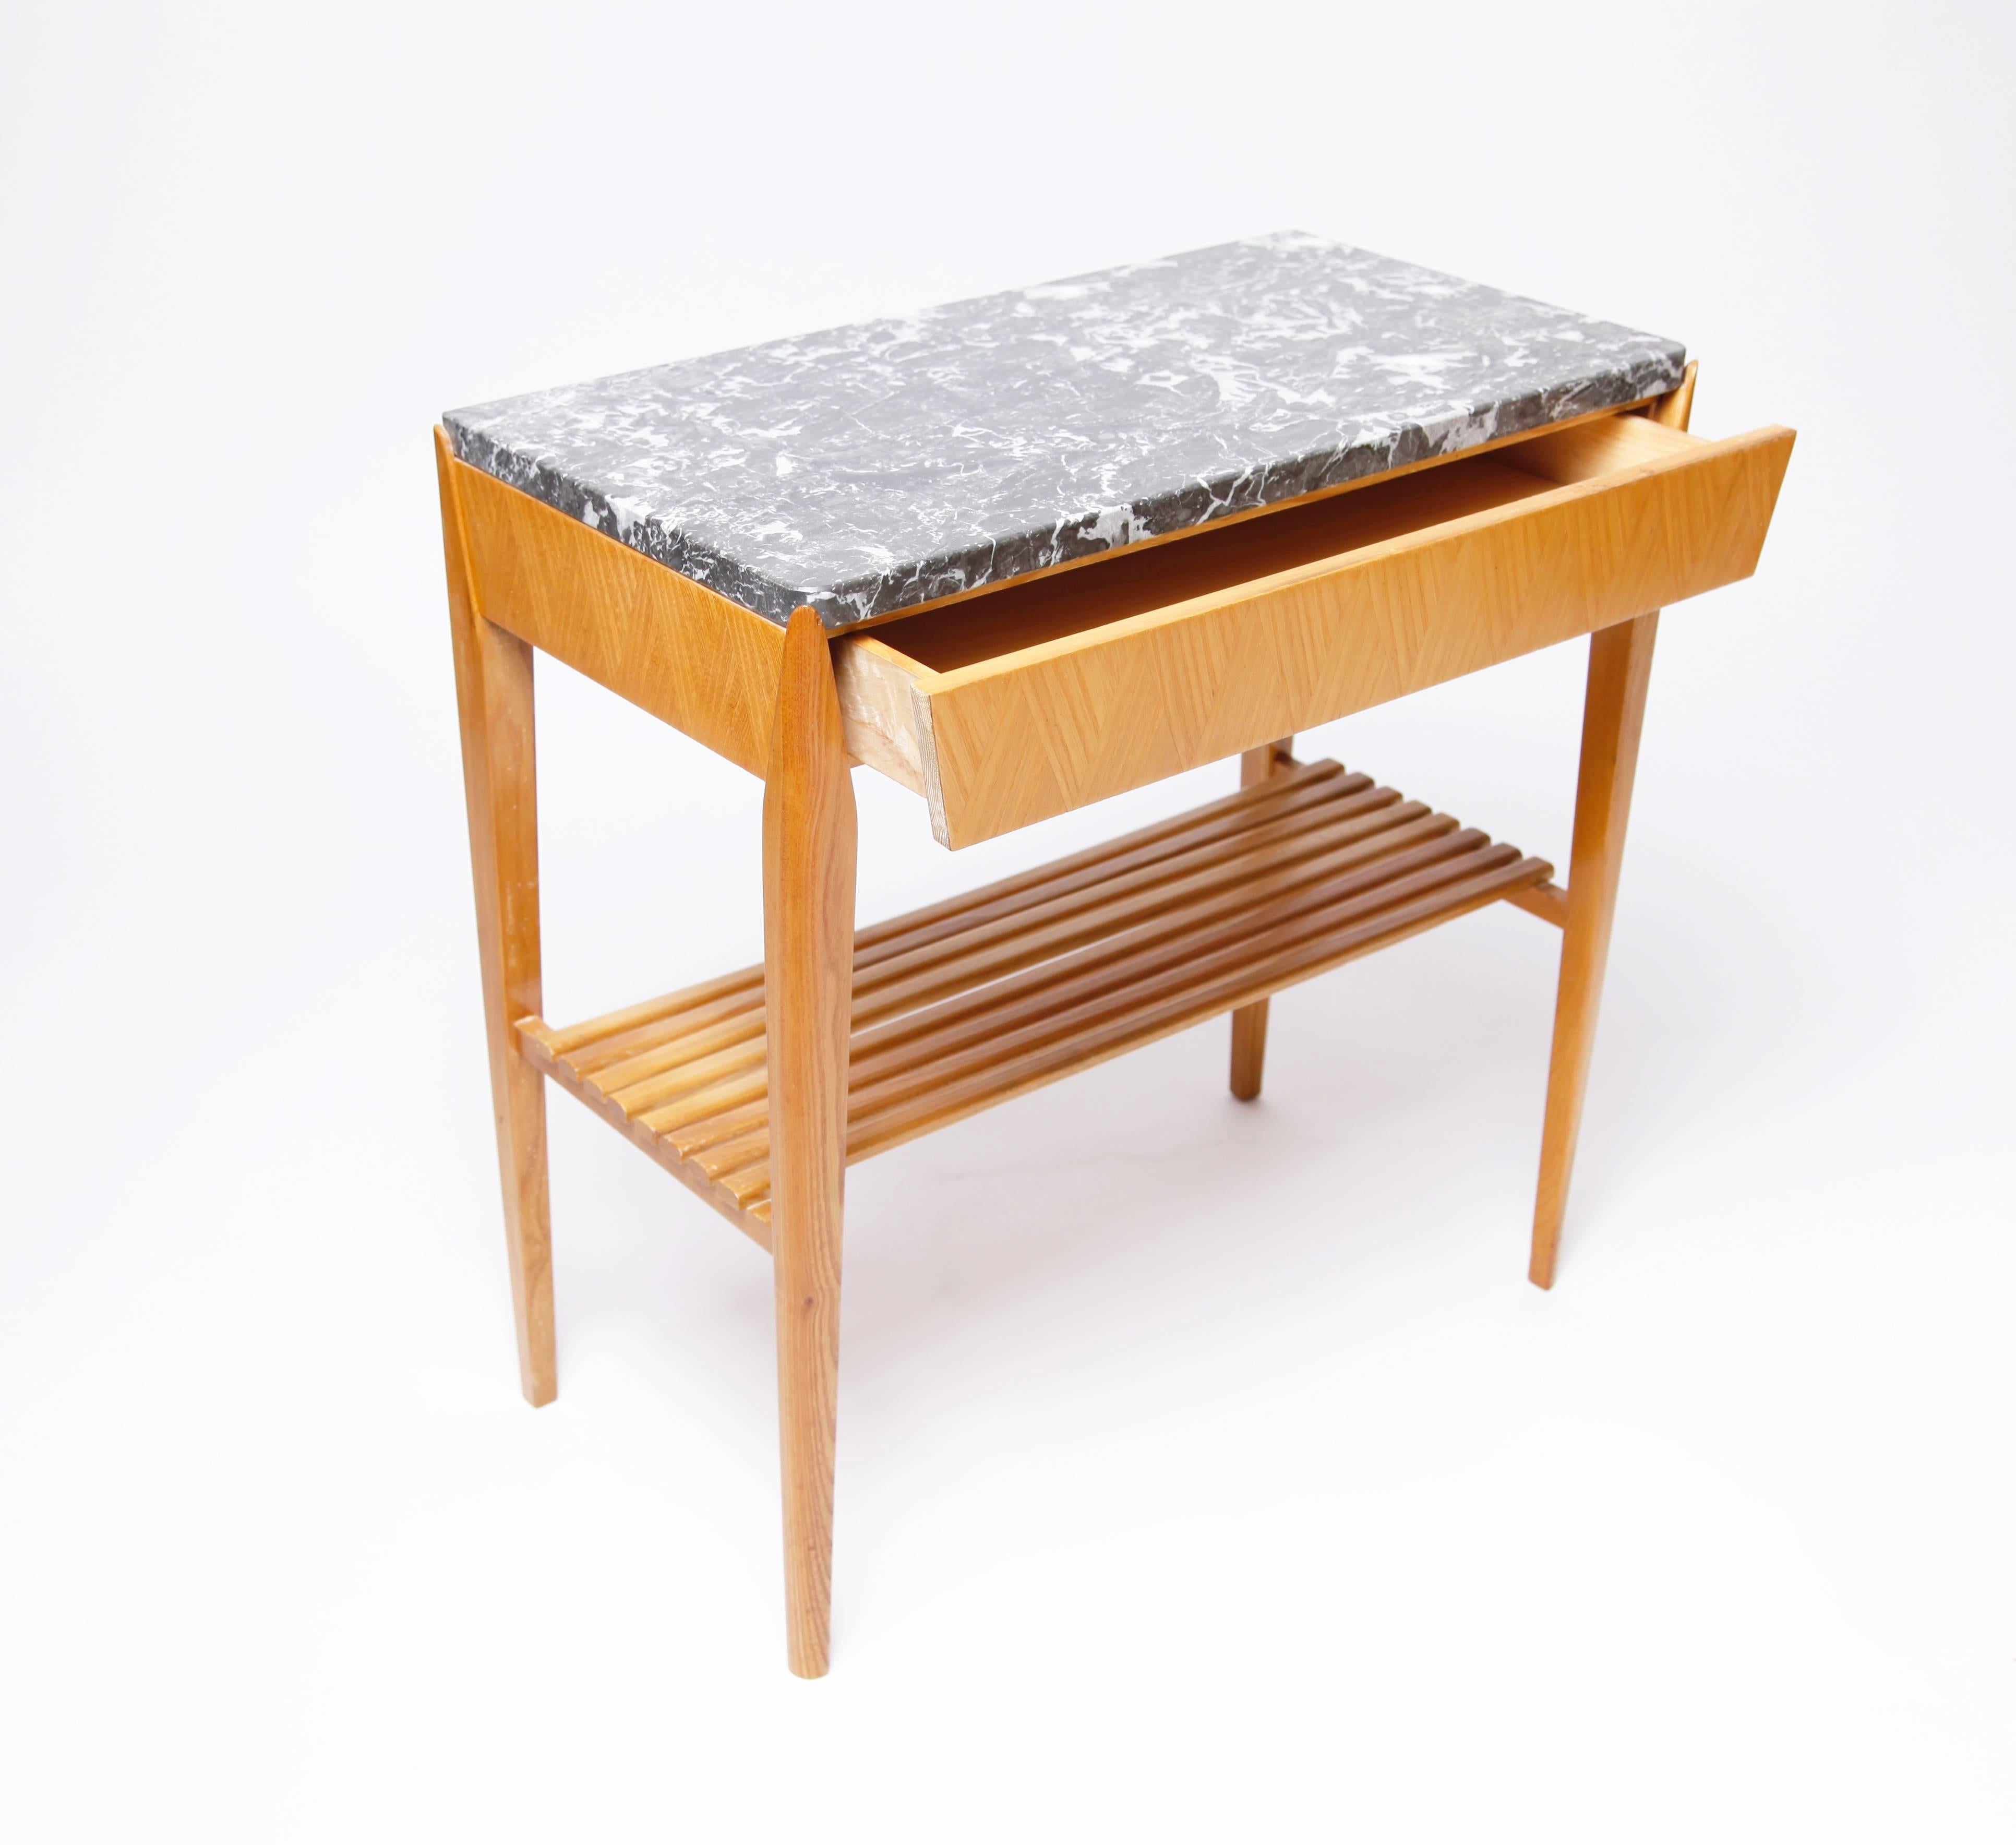 At first glance a very simple design, this small side table rewards closer examination. The dark gray and white marble top makes a nice contrast with the warm finish of the wood. The single drawer and the apron are ornamented with a very pretty